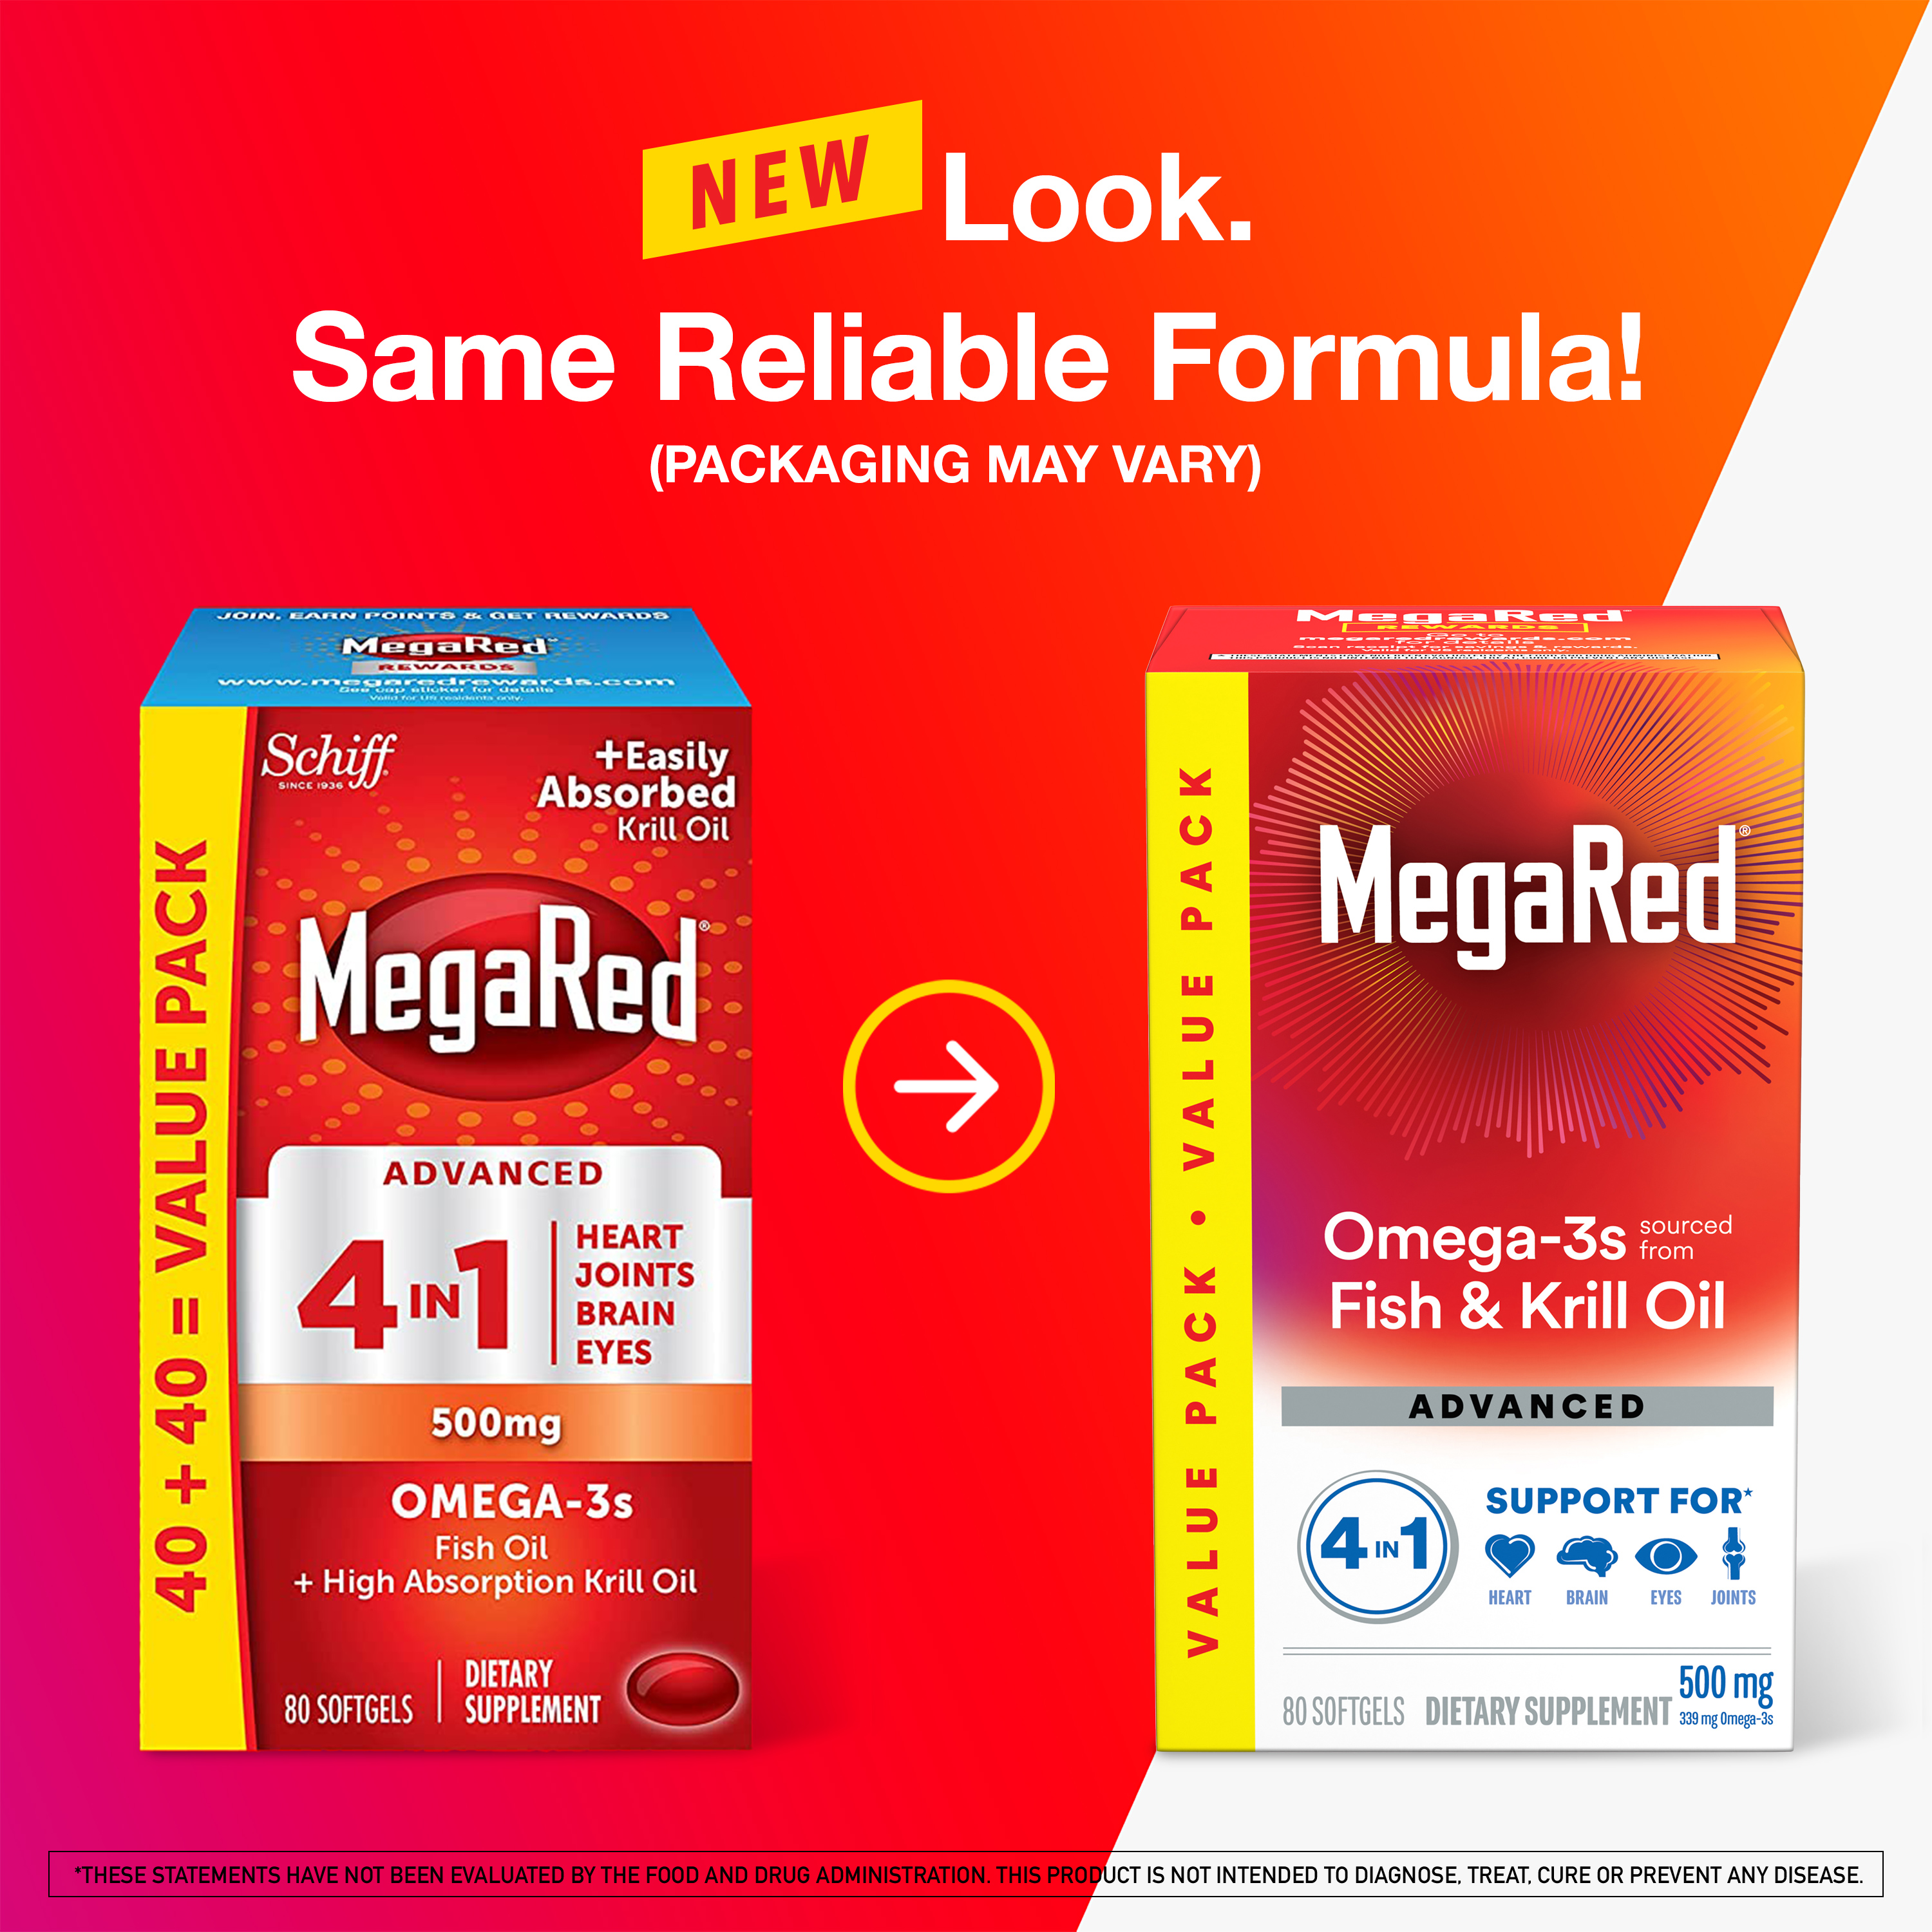 MegaRed Advanced 4in1 500mg, 80 Softgels - image 5 of 7